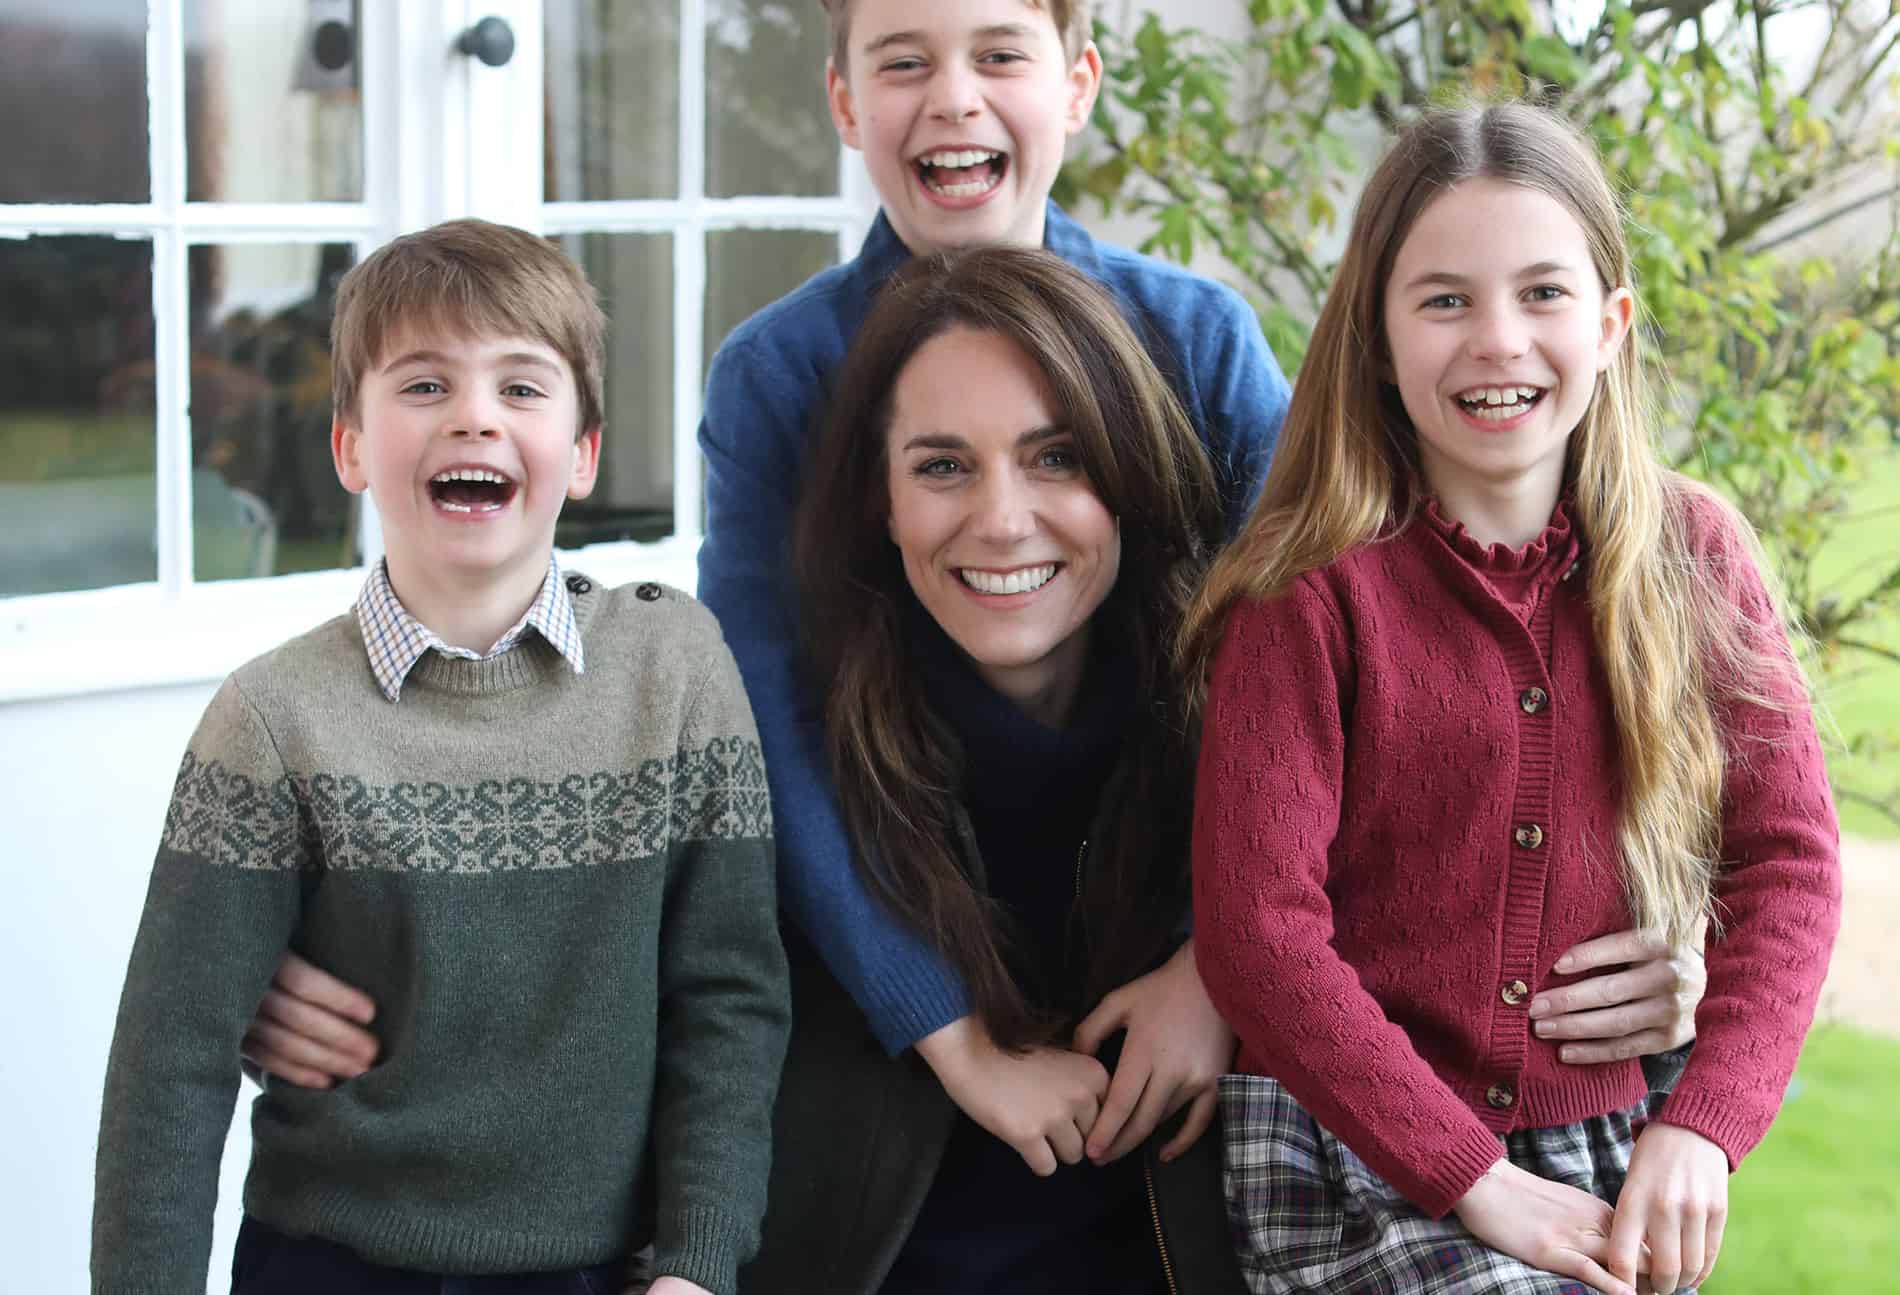 Literally no one is buying that Kate digitally altered family pic